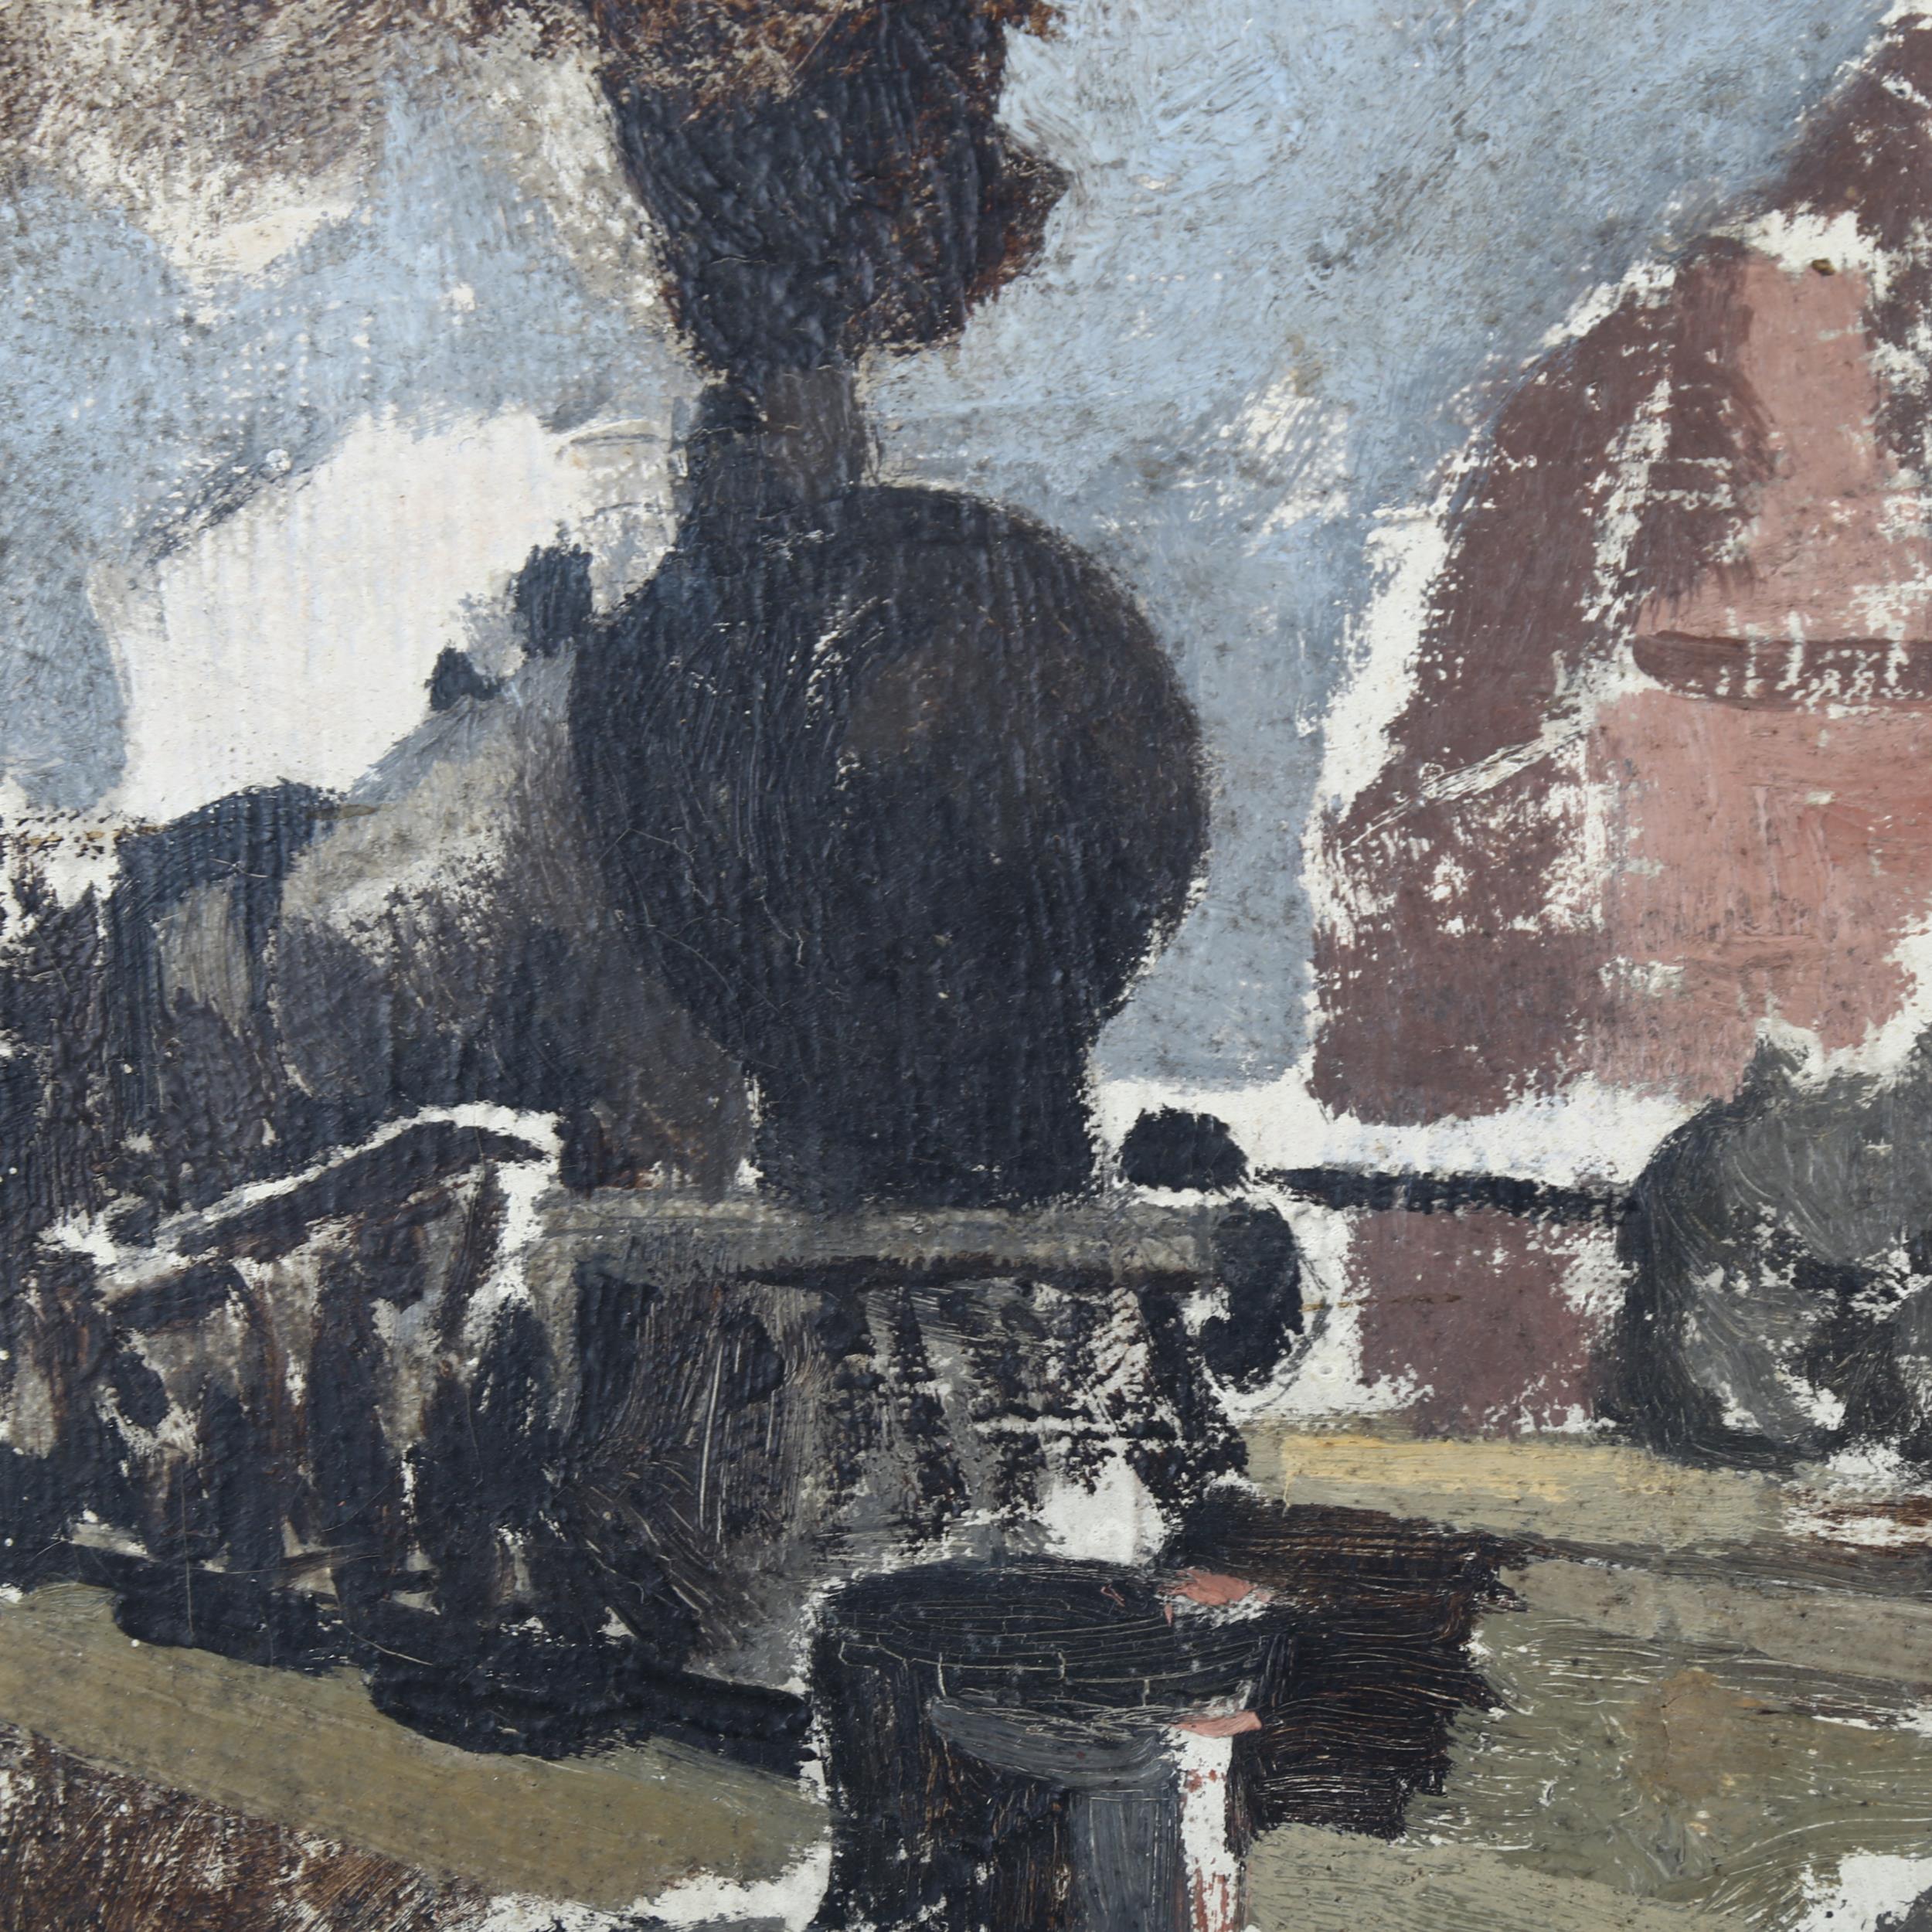 Gerard Reitlinger (1900 - 1978), steam trains in the goods yard, oil on canvas, artist's estate - Image 3 of 4